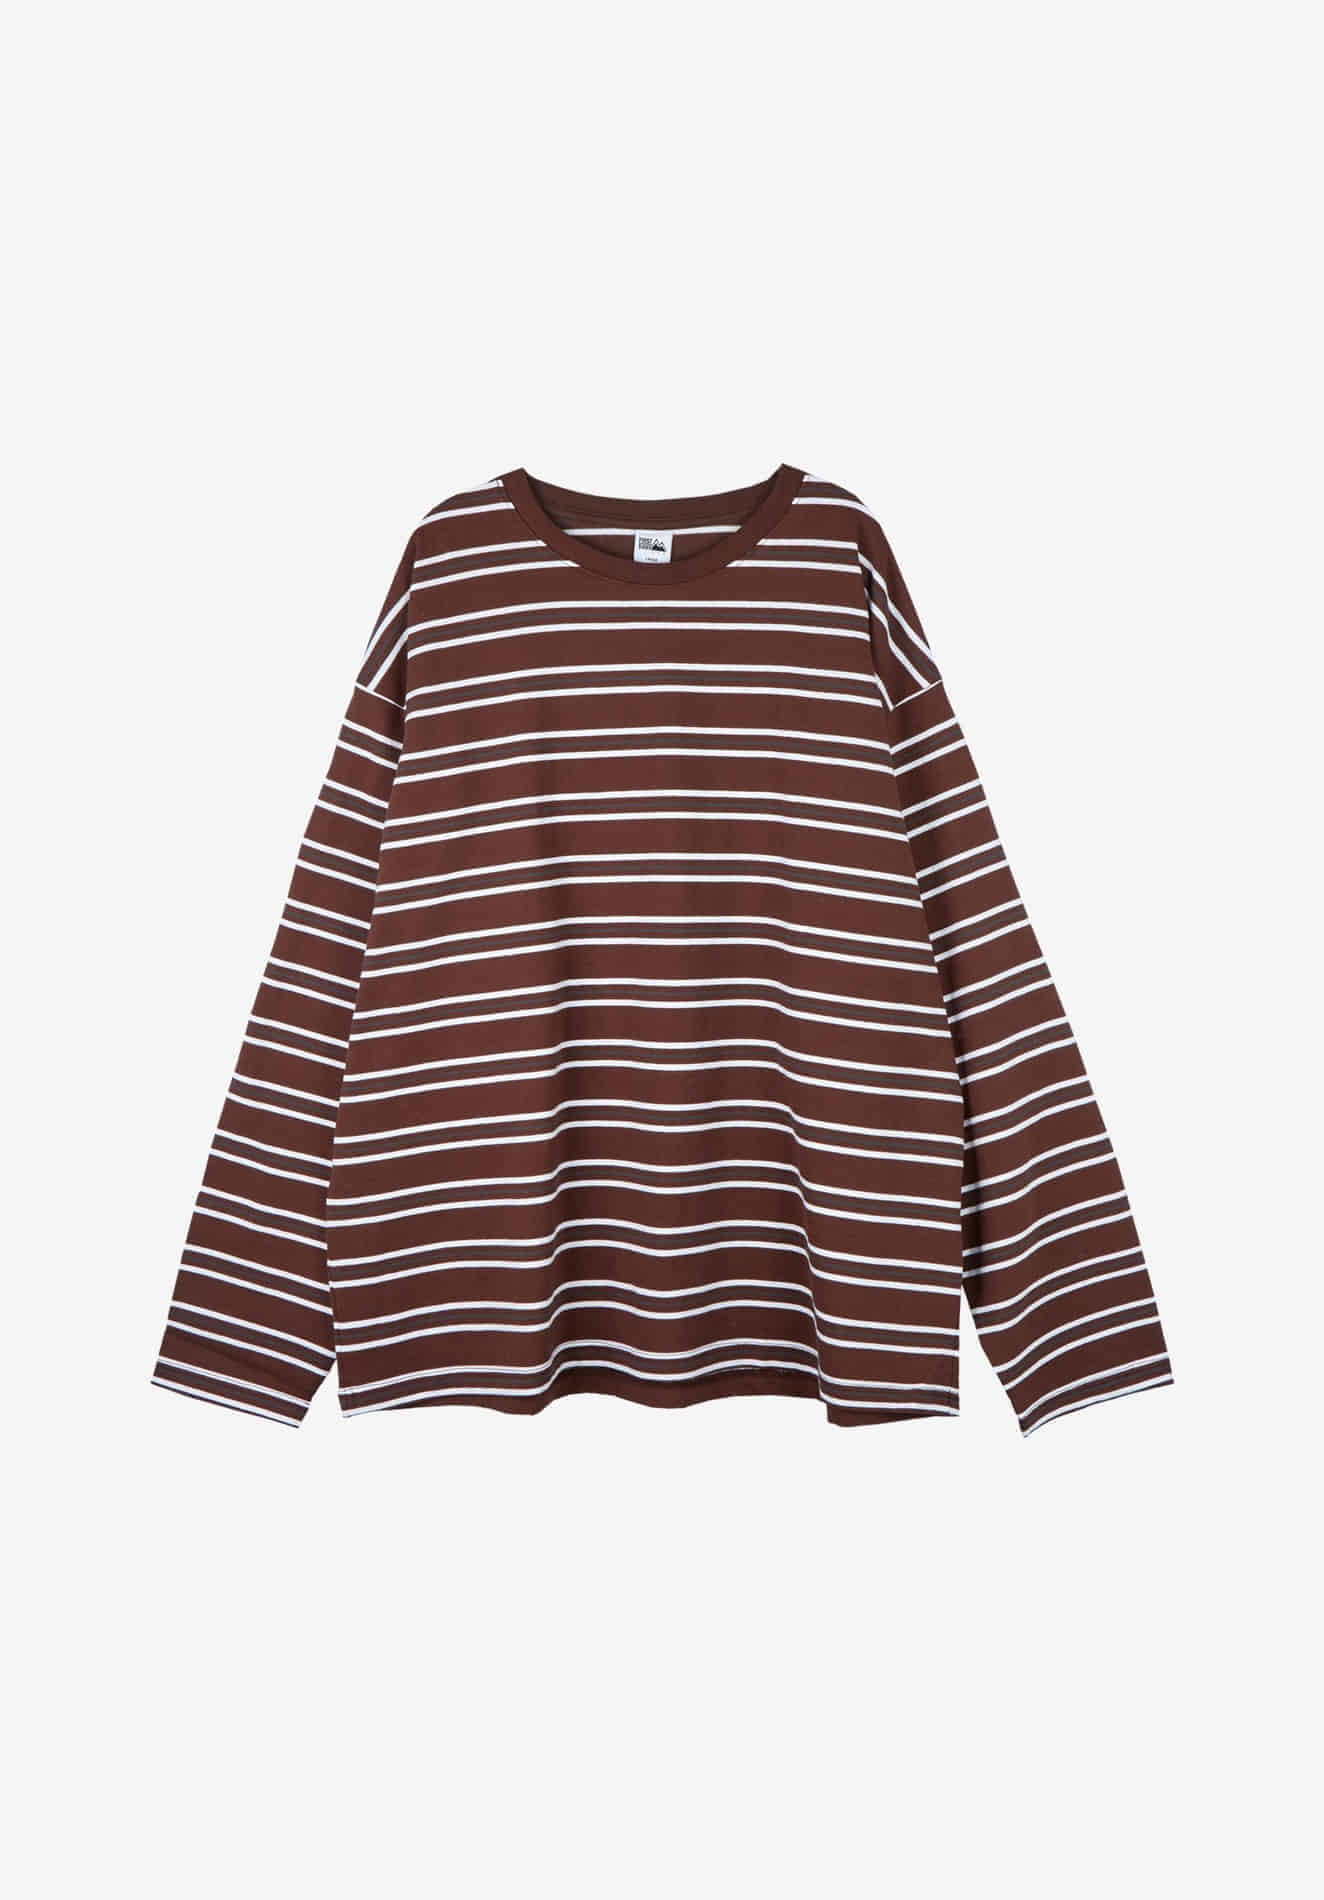 BAGGY TEE L/S COTTON BORDER JERSEY, BROWN